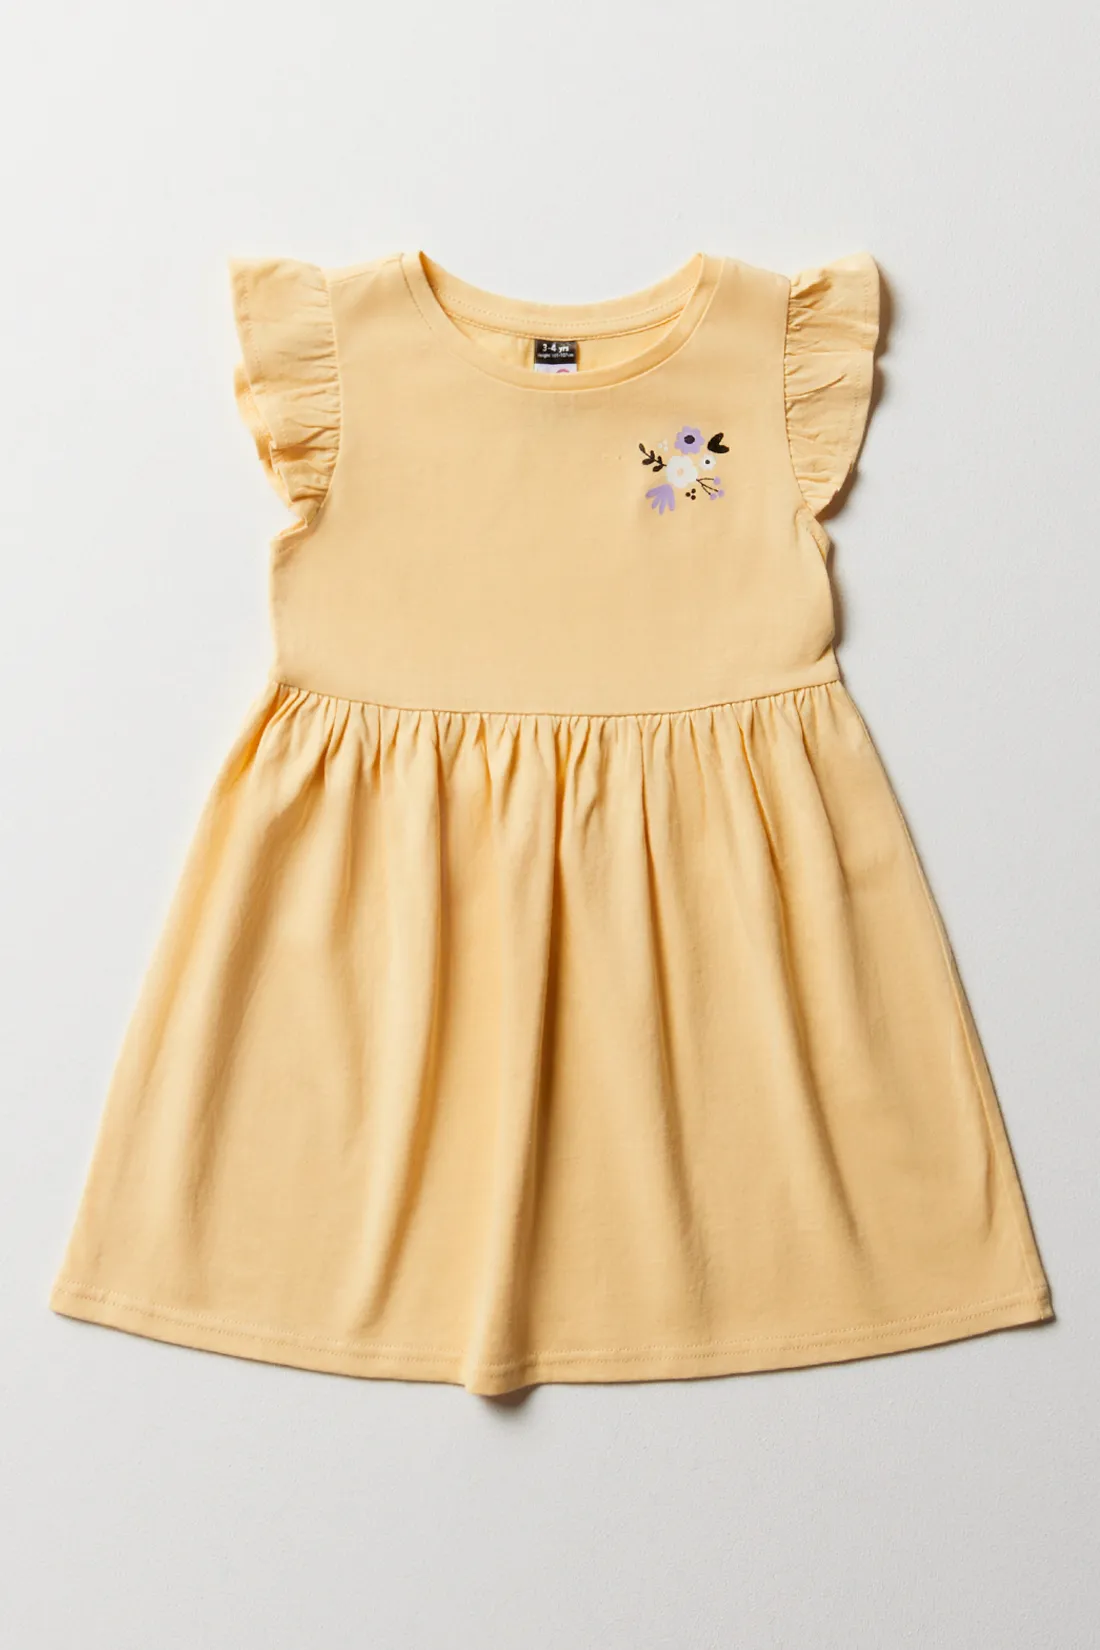 Fit & flare dress yellow - GIRLS 2-8 YEARS Dresses & Jumpsuits | Ackermans